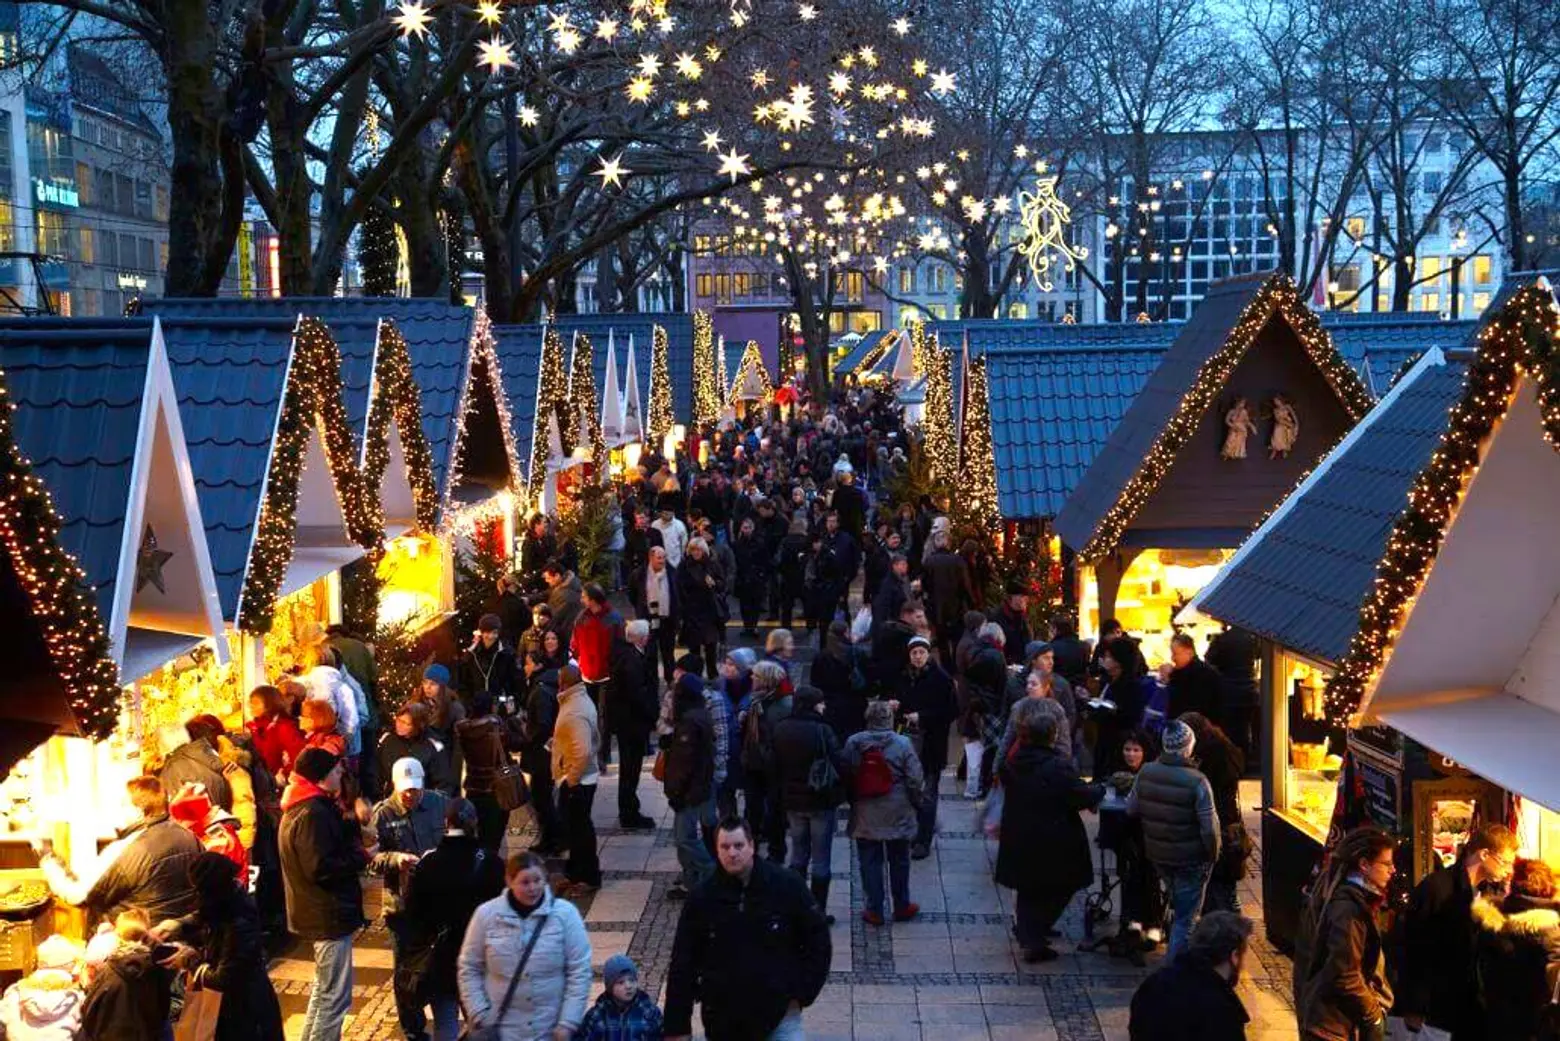 Month-long ‘winterfest’ and holiday market coming to the Brooklyn Museum